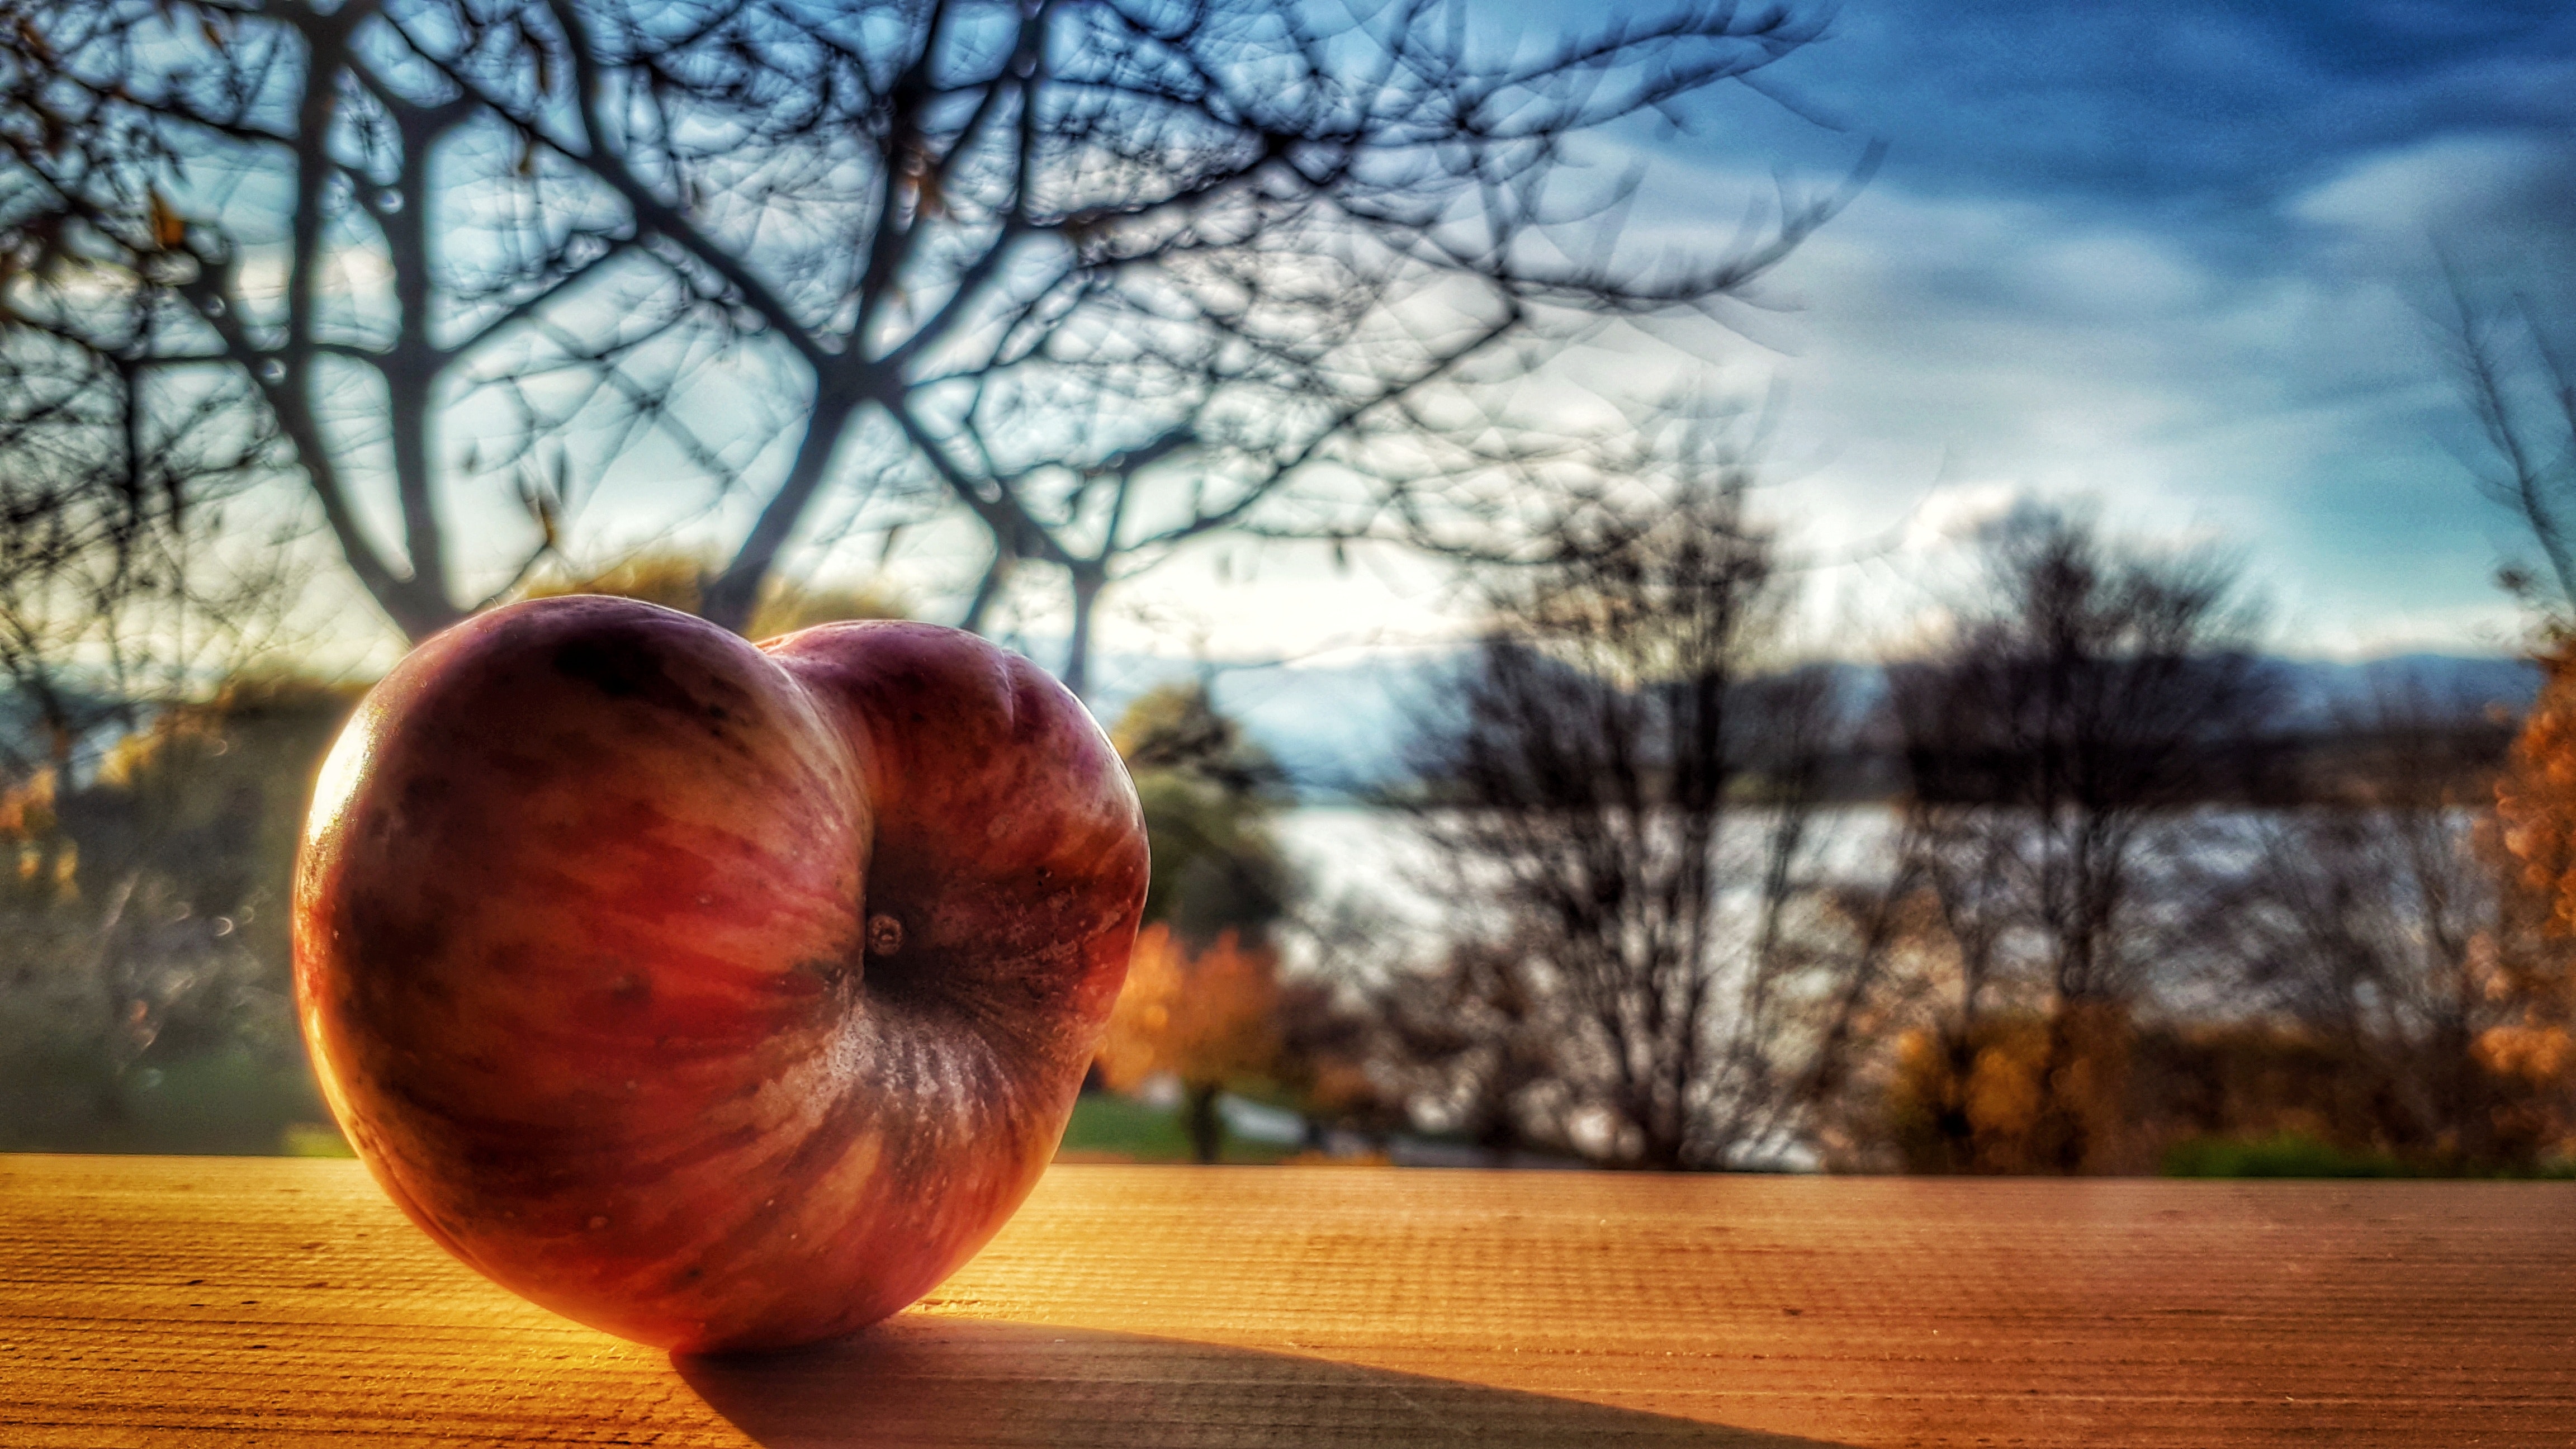 Red apple fruit with bare trees in distance photo